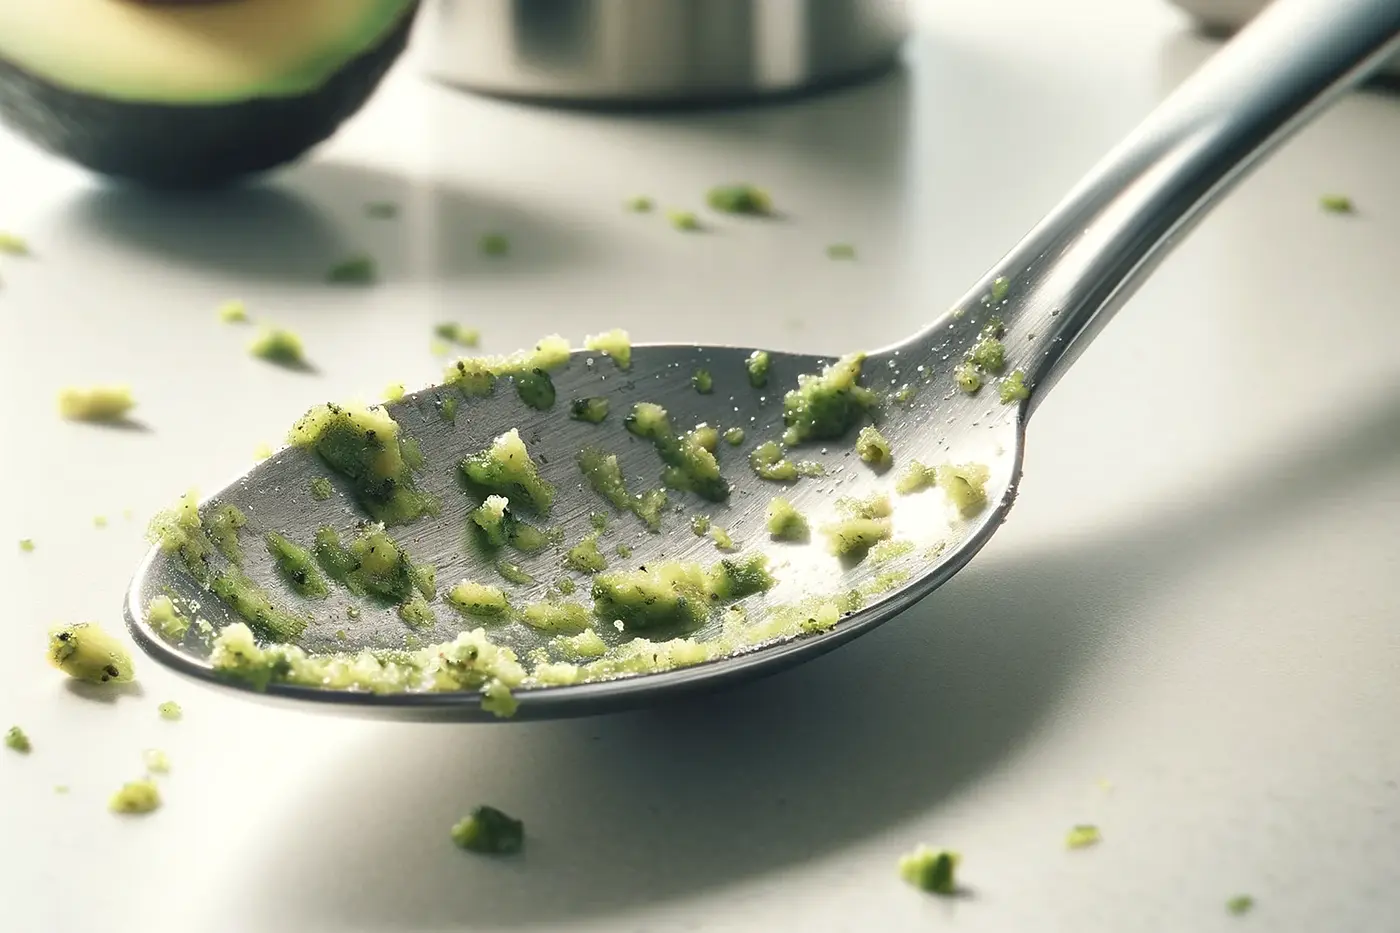 Image of a stainless steel spoon on a white countertop, with tiny, dried crusty bits of green avocado flesh adhering to its surface, illustrating the challenge of cleaning avocado remnants after a dishwasher cycle.